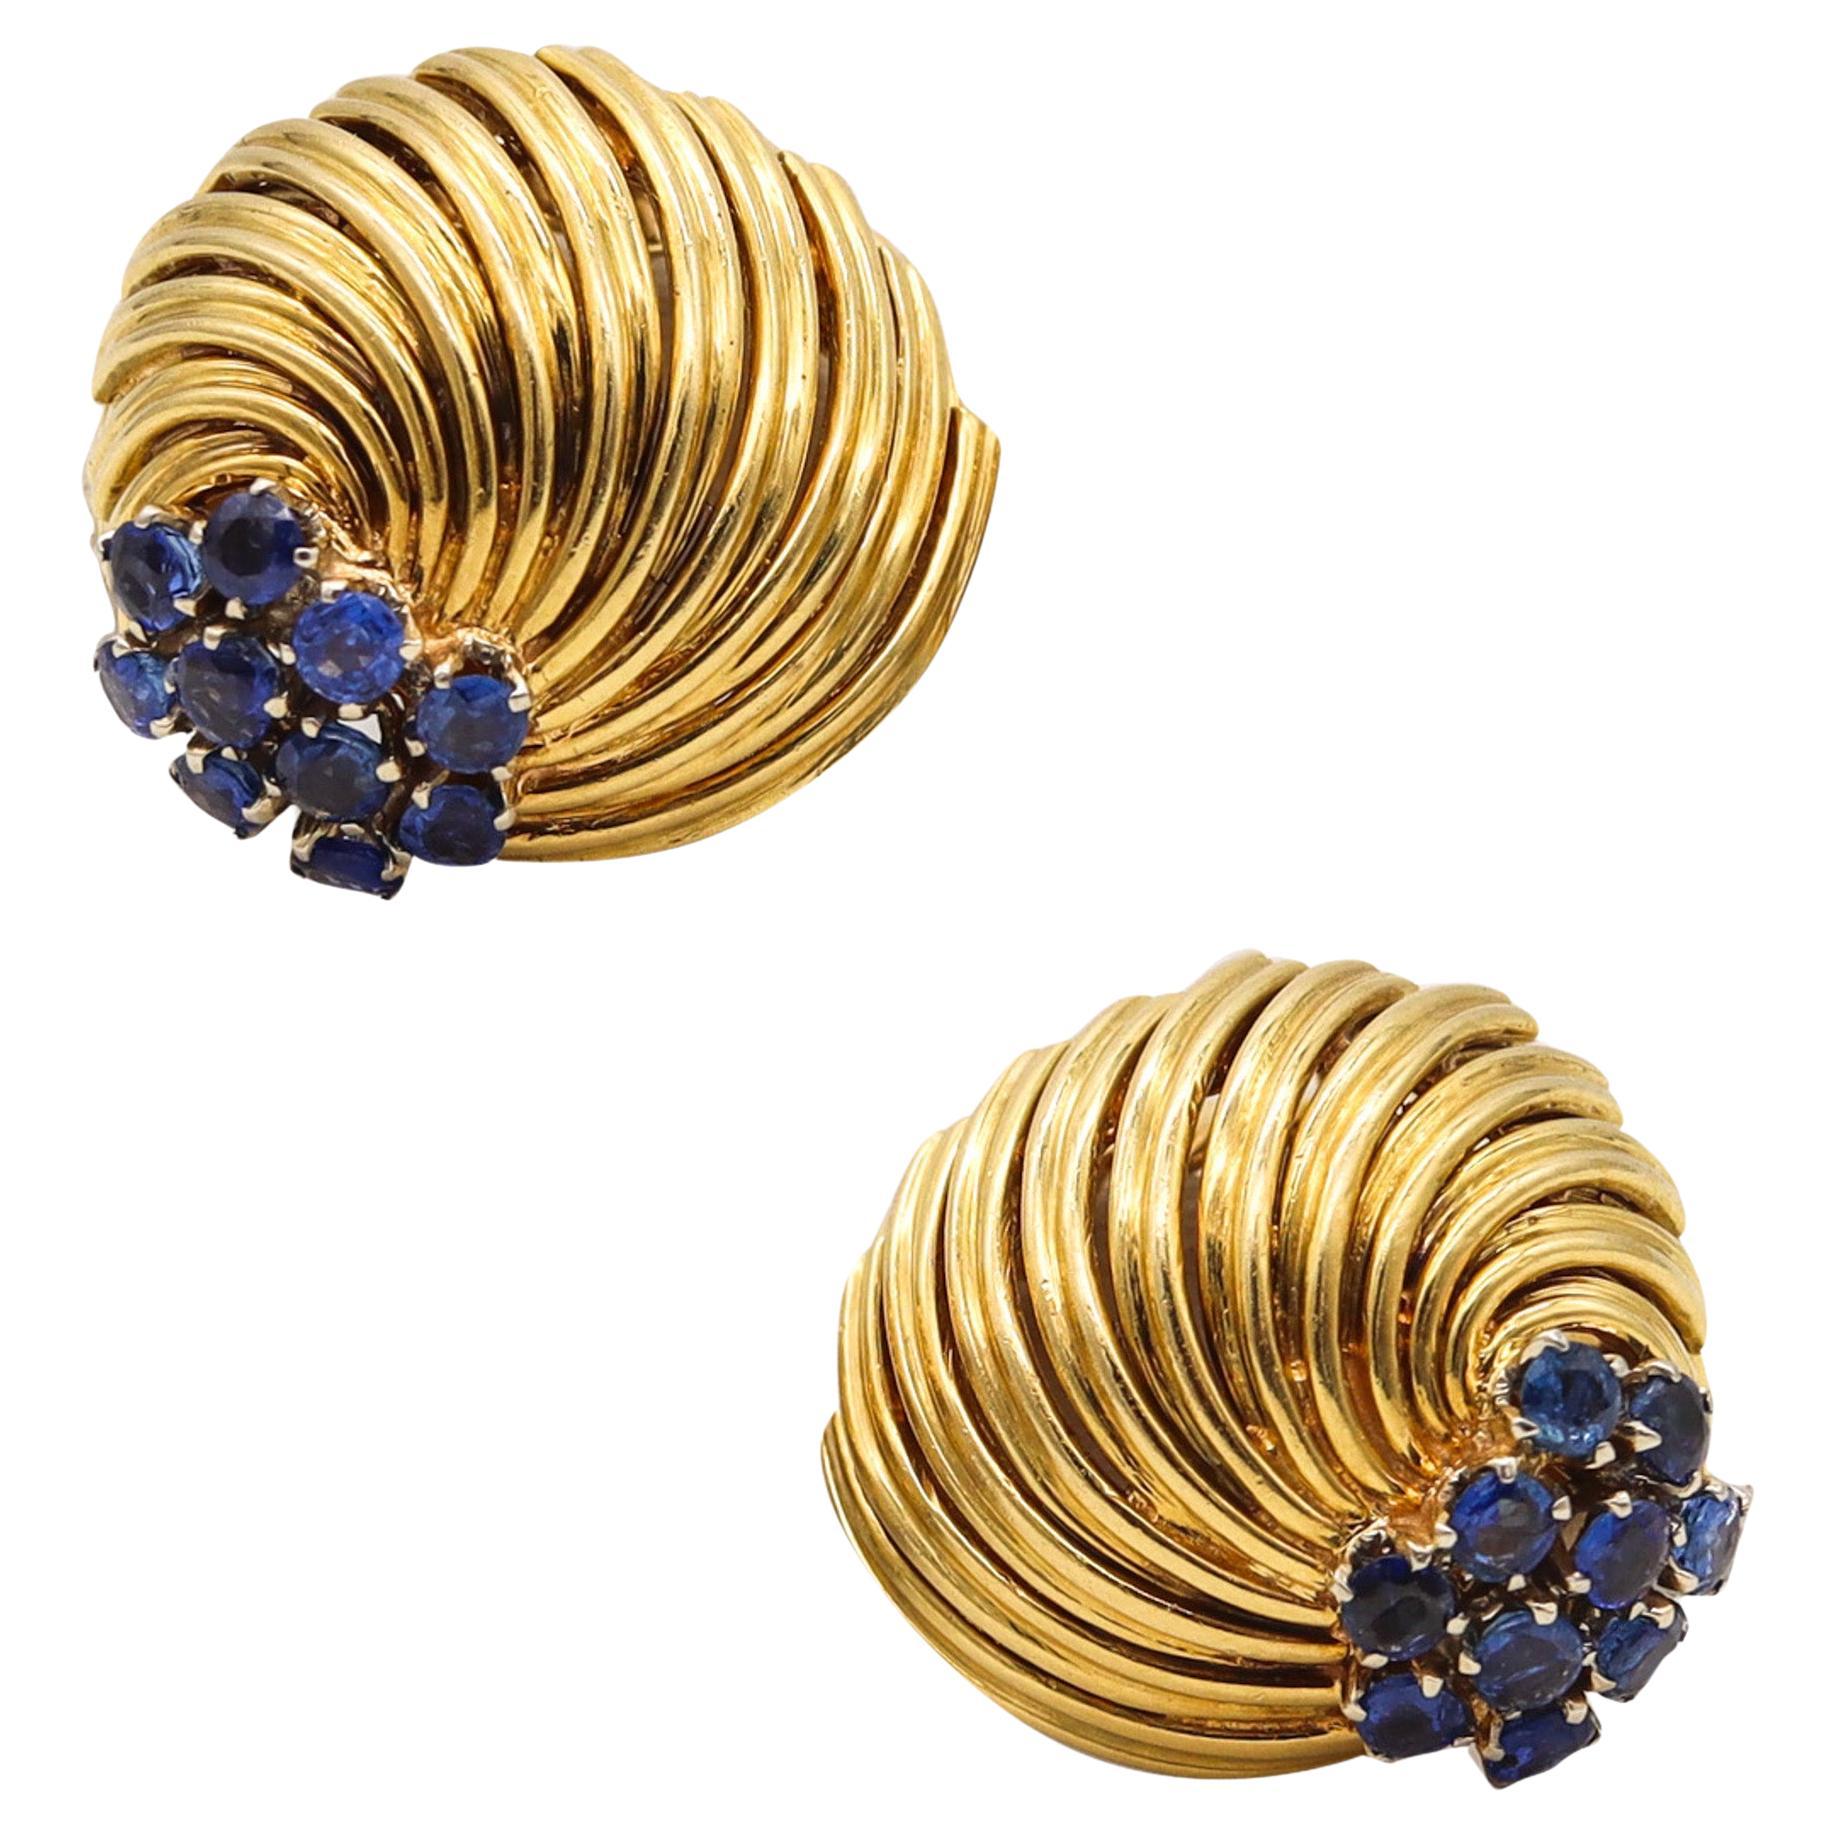 David Balogh 1960 Ear Clips In 18Kt Yellow Gold With 2.04 Ctw In Blue Sapphires For Sale